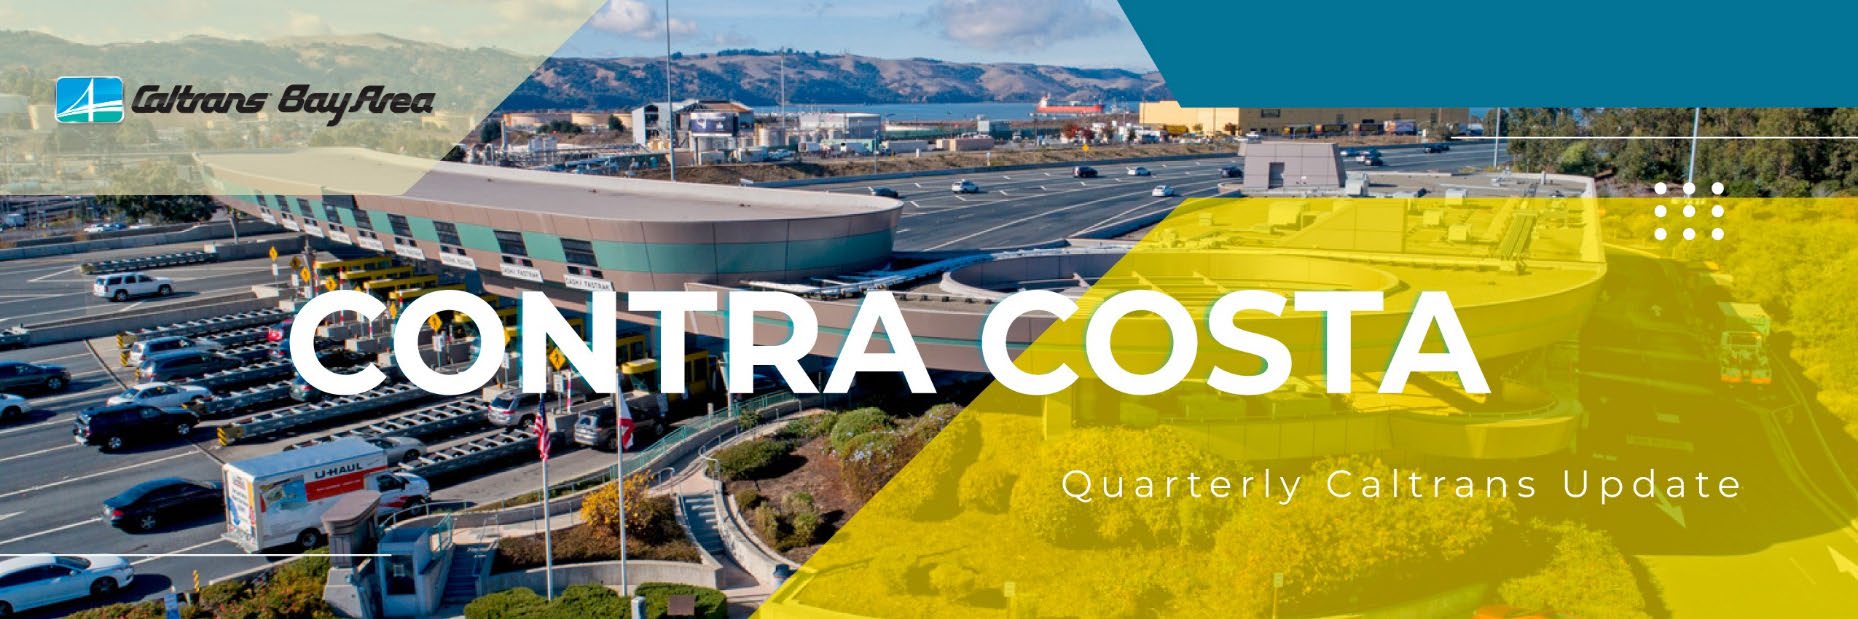 Header image for the Contra Costa Quarterly Caltrans Update